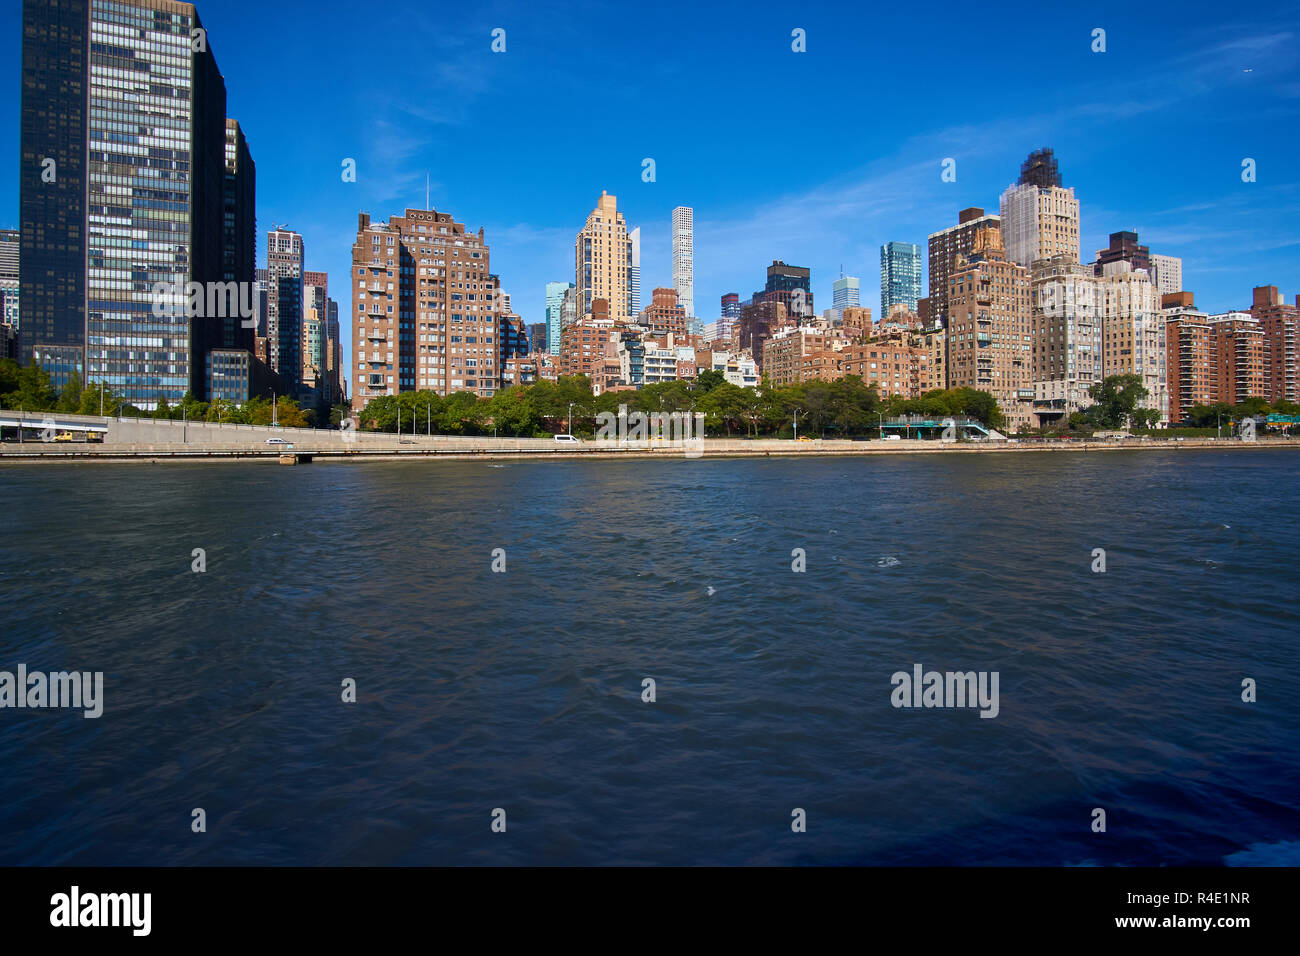 New York City high buildings, a blue sky and water Stock Photo